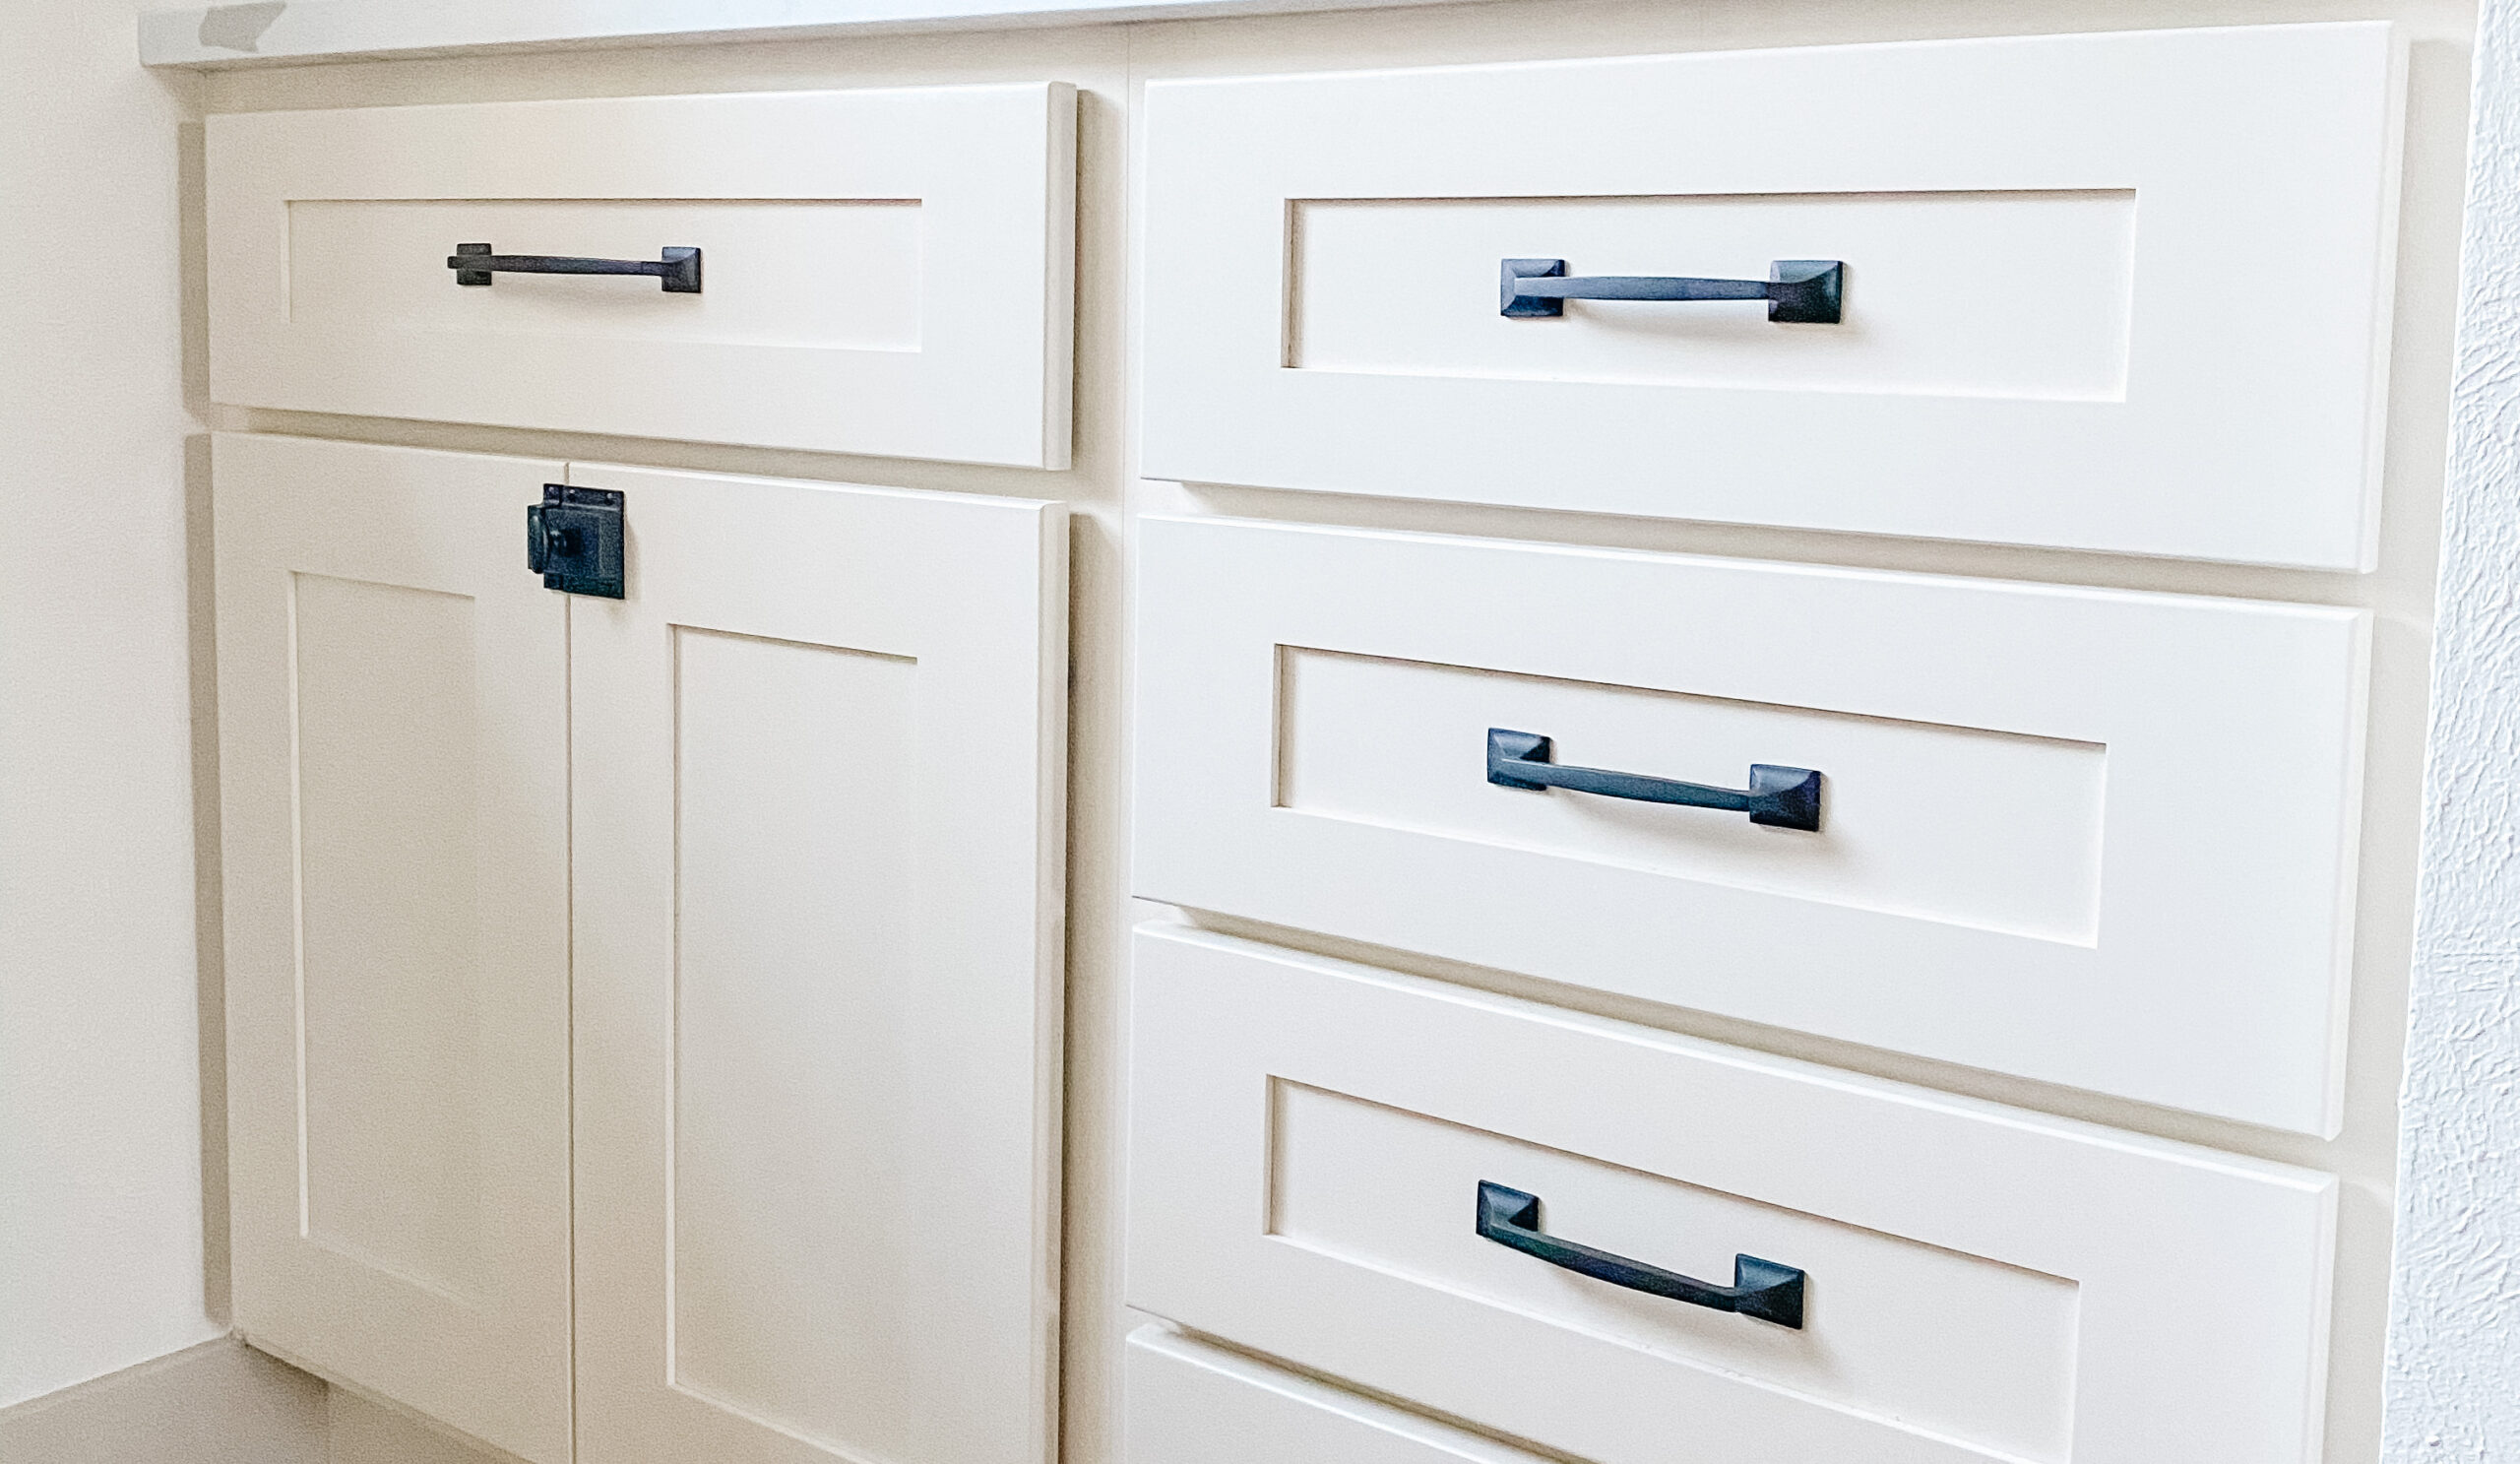 Our Kitchen Cabinet Hardware How To Mix Match Styles